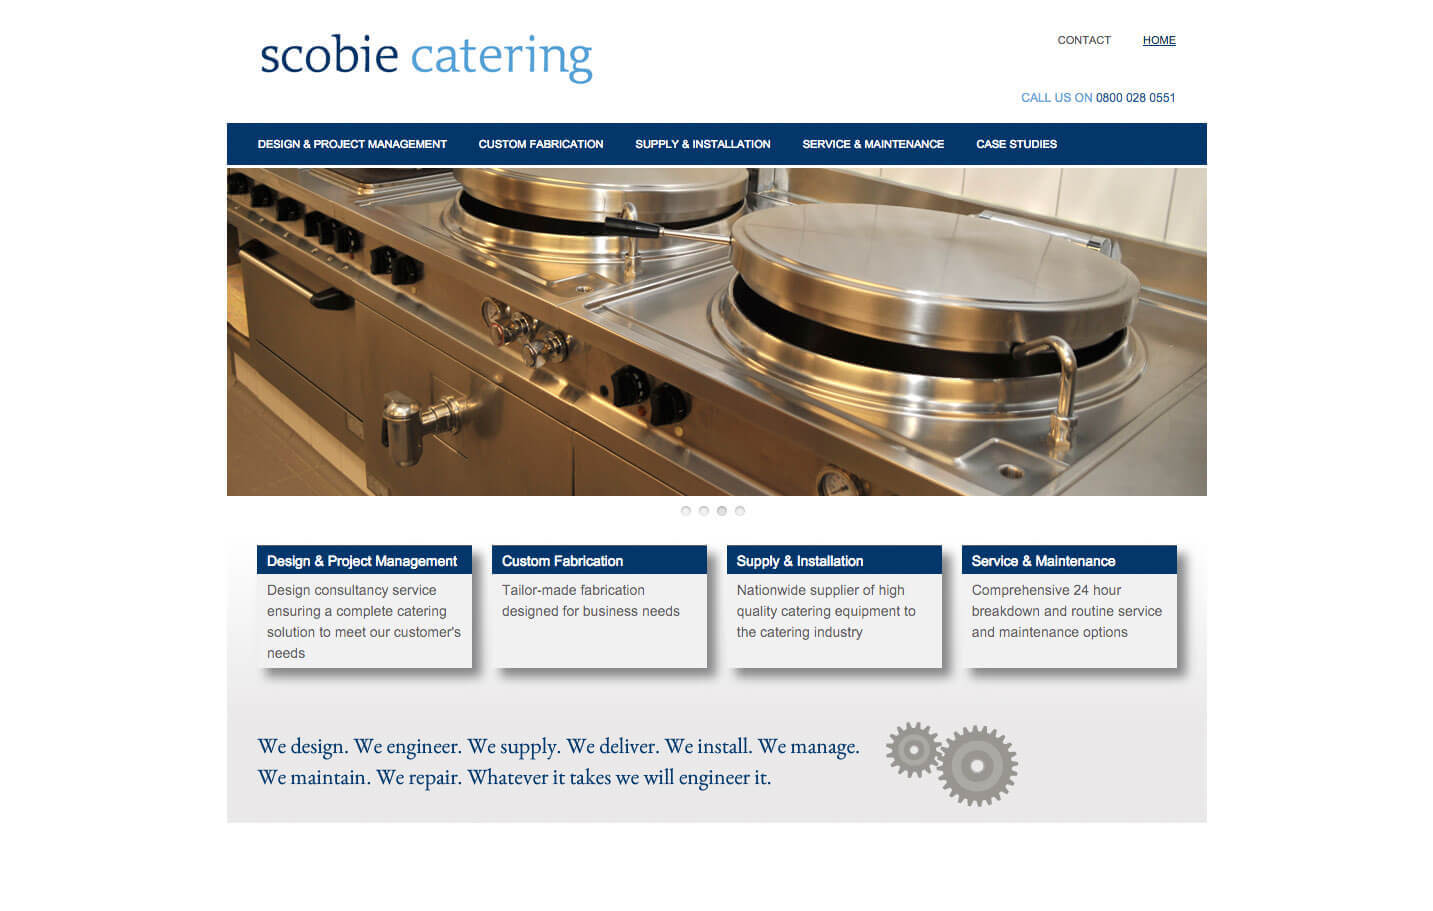 Scobie Catering - Home page